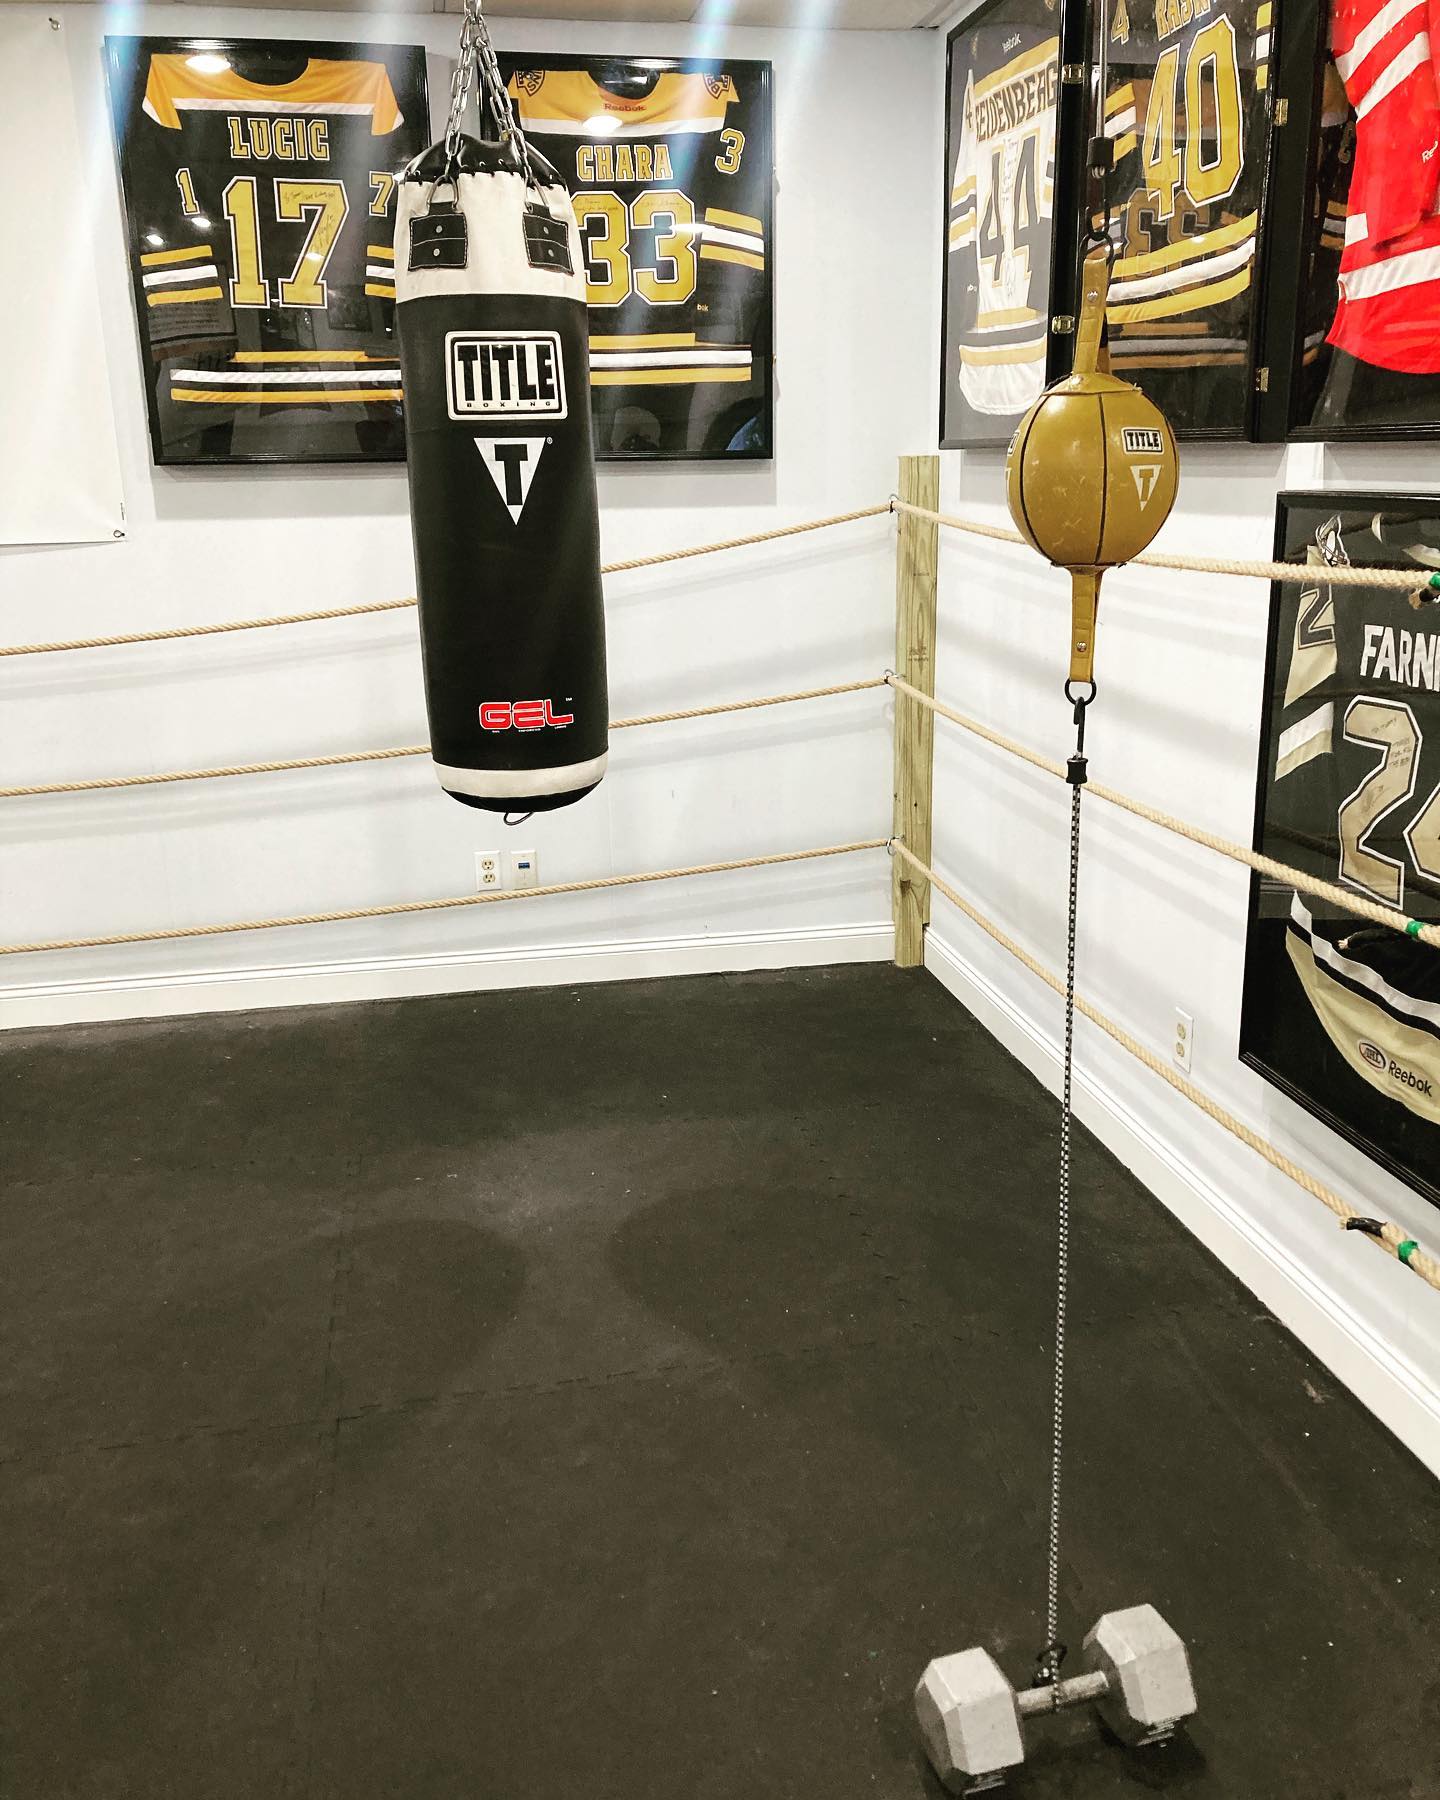 Just a few tools that will help you build confidence , conditioning , movement , patience , fitness and much more . Contact us today to schedule a free 1-on-1 boxing workout and learn more on how to start . @tommymcinerney